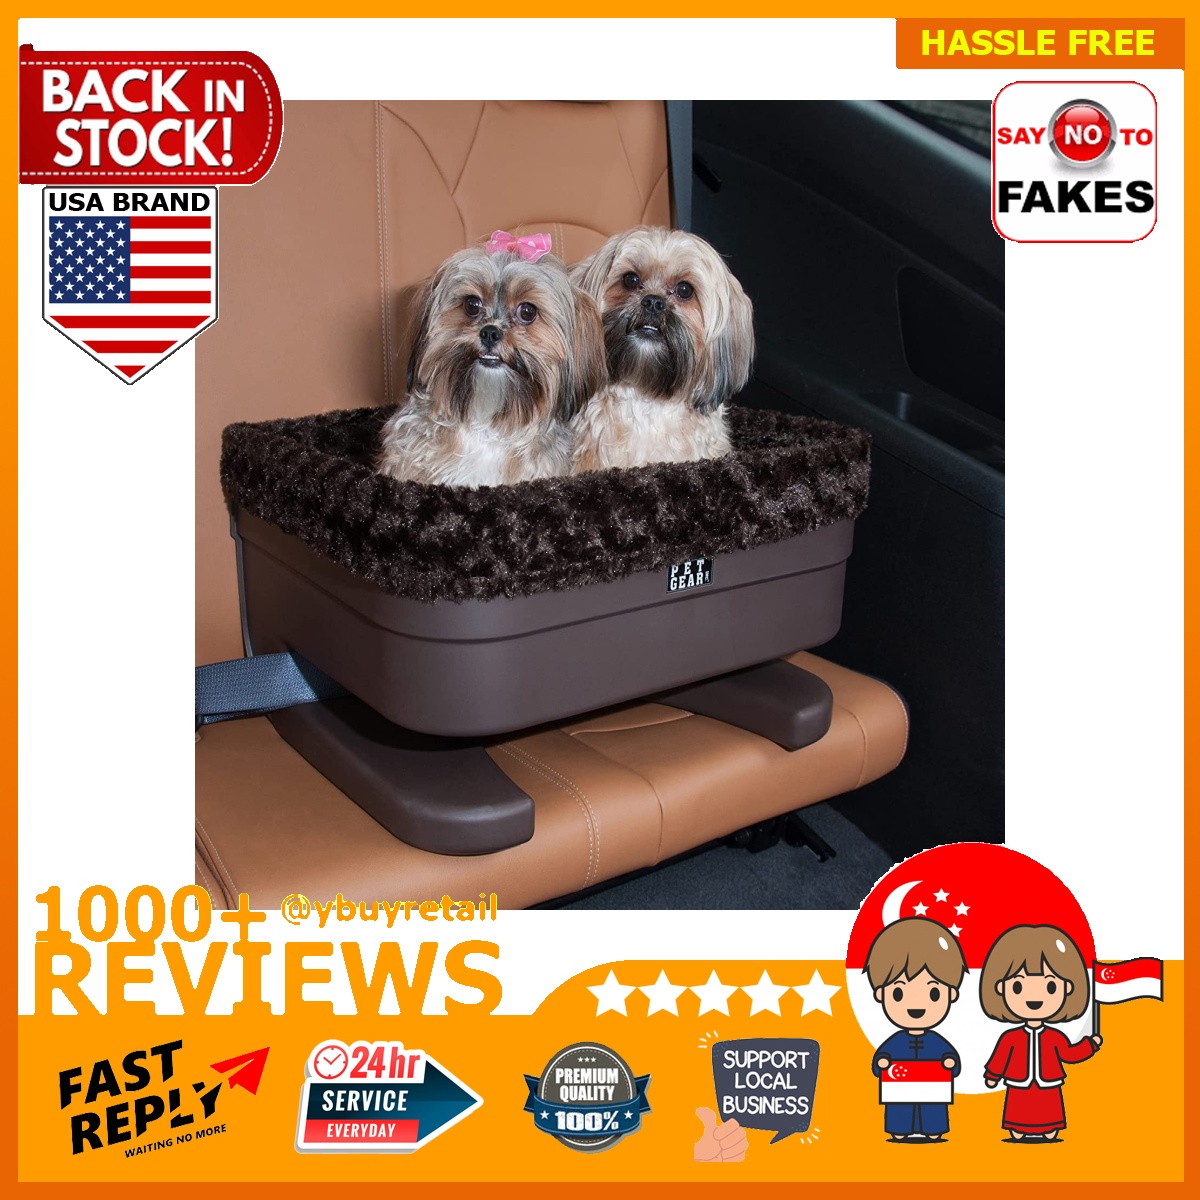 BML] Pet Gear Booster Seat for Dogs/Cats, Removable Washable